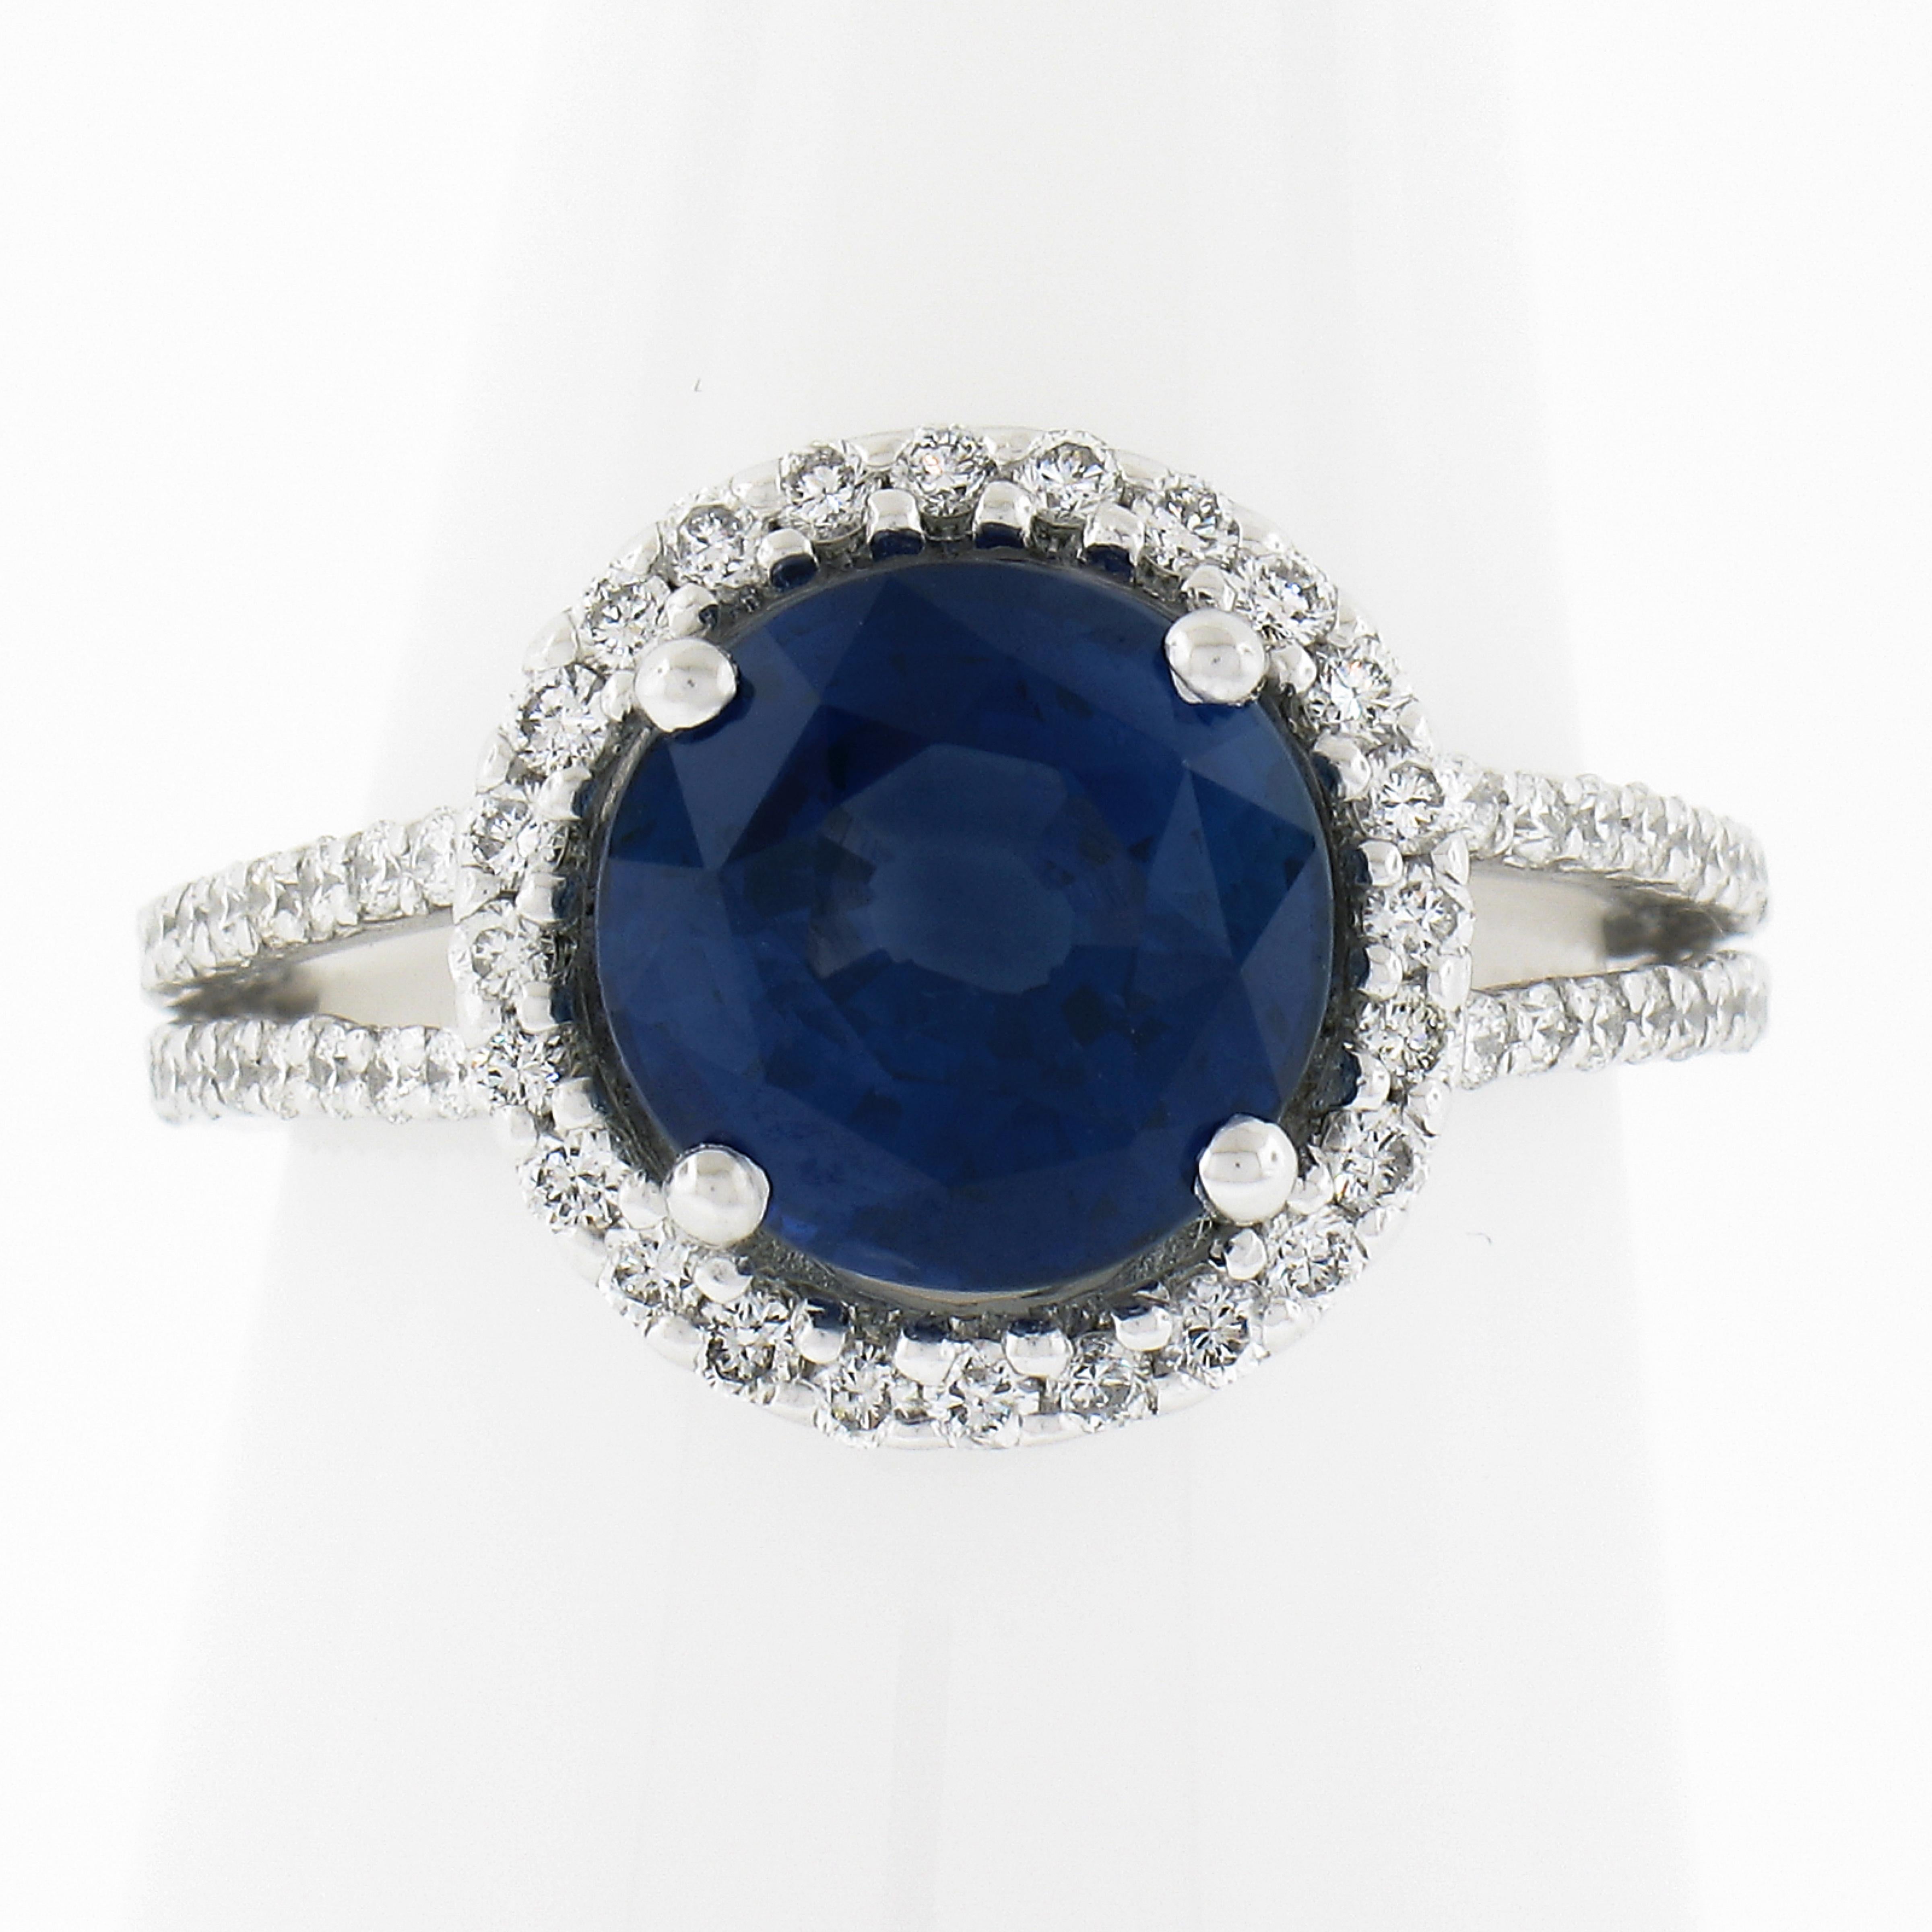 --Stone(s):--
(1) Natural Genuine Sapphire - Round Brilliant Cut - Prong Set - Rich Vibrant Royal Blue Color - 3.61ct (exact - certified)
** See Certification Details Below for Complete Info **
Numerous Natural Genuine Diamonds - Round Brilliant Cut